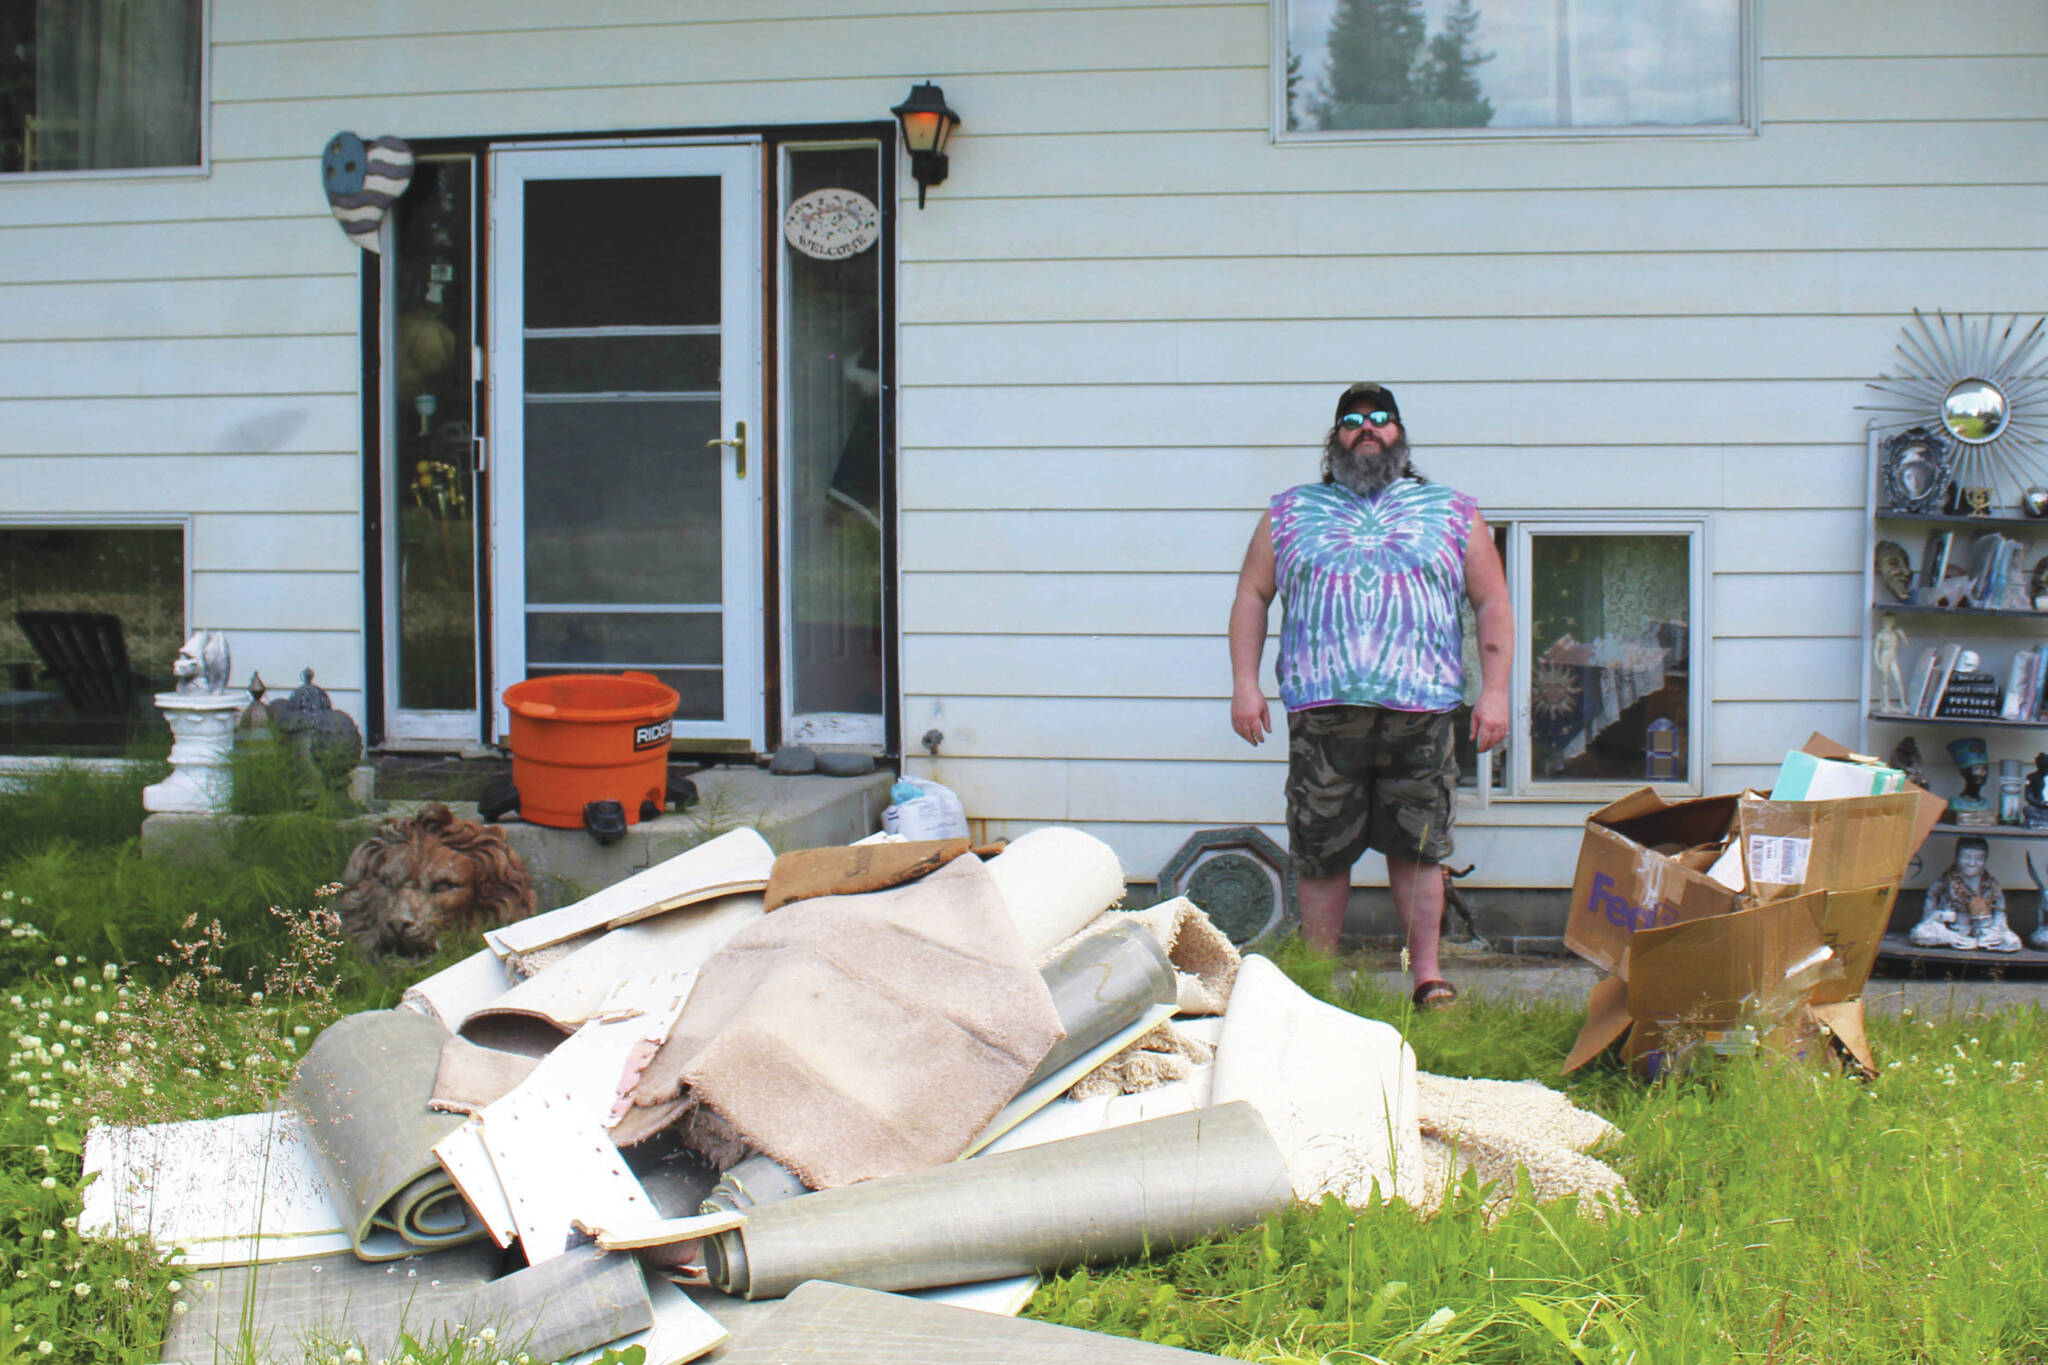 Ashlyn O’Hara/Peninsula Clarion
Marcus Ashkenasy stands near a pile of water-damaged carpet pulled from the bottom level of his house, July 24 near Kenai.